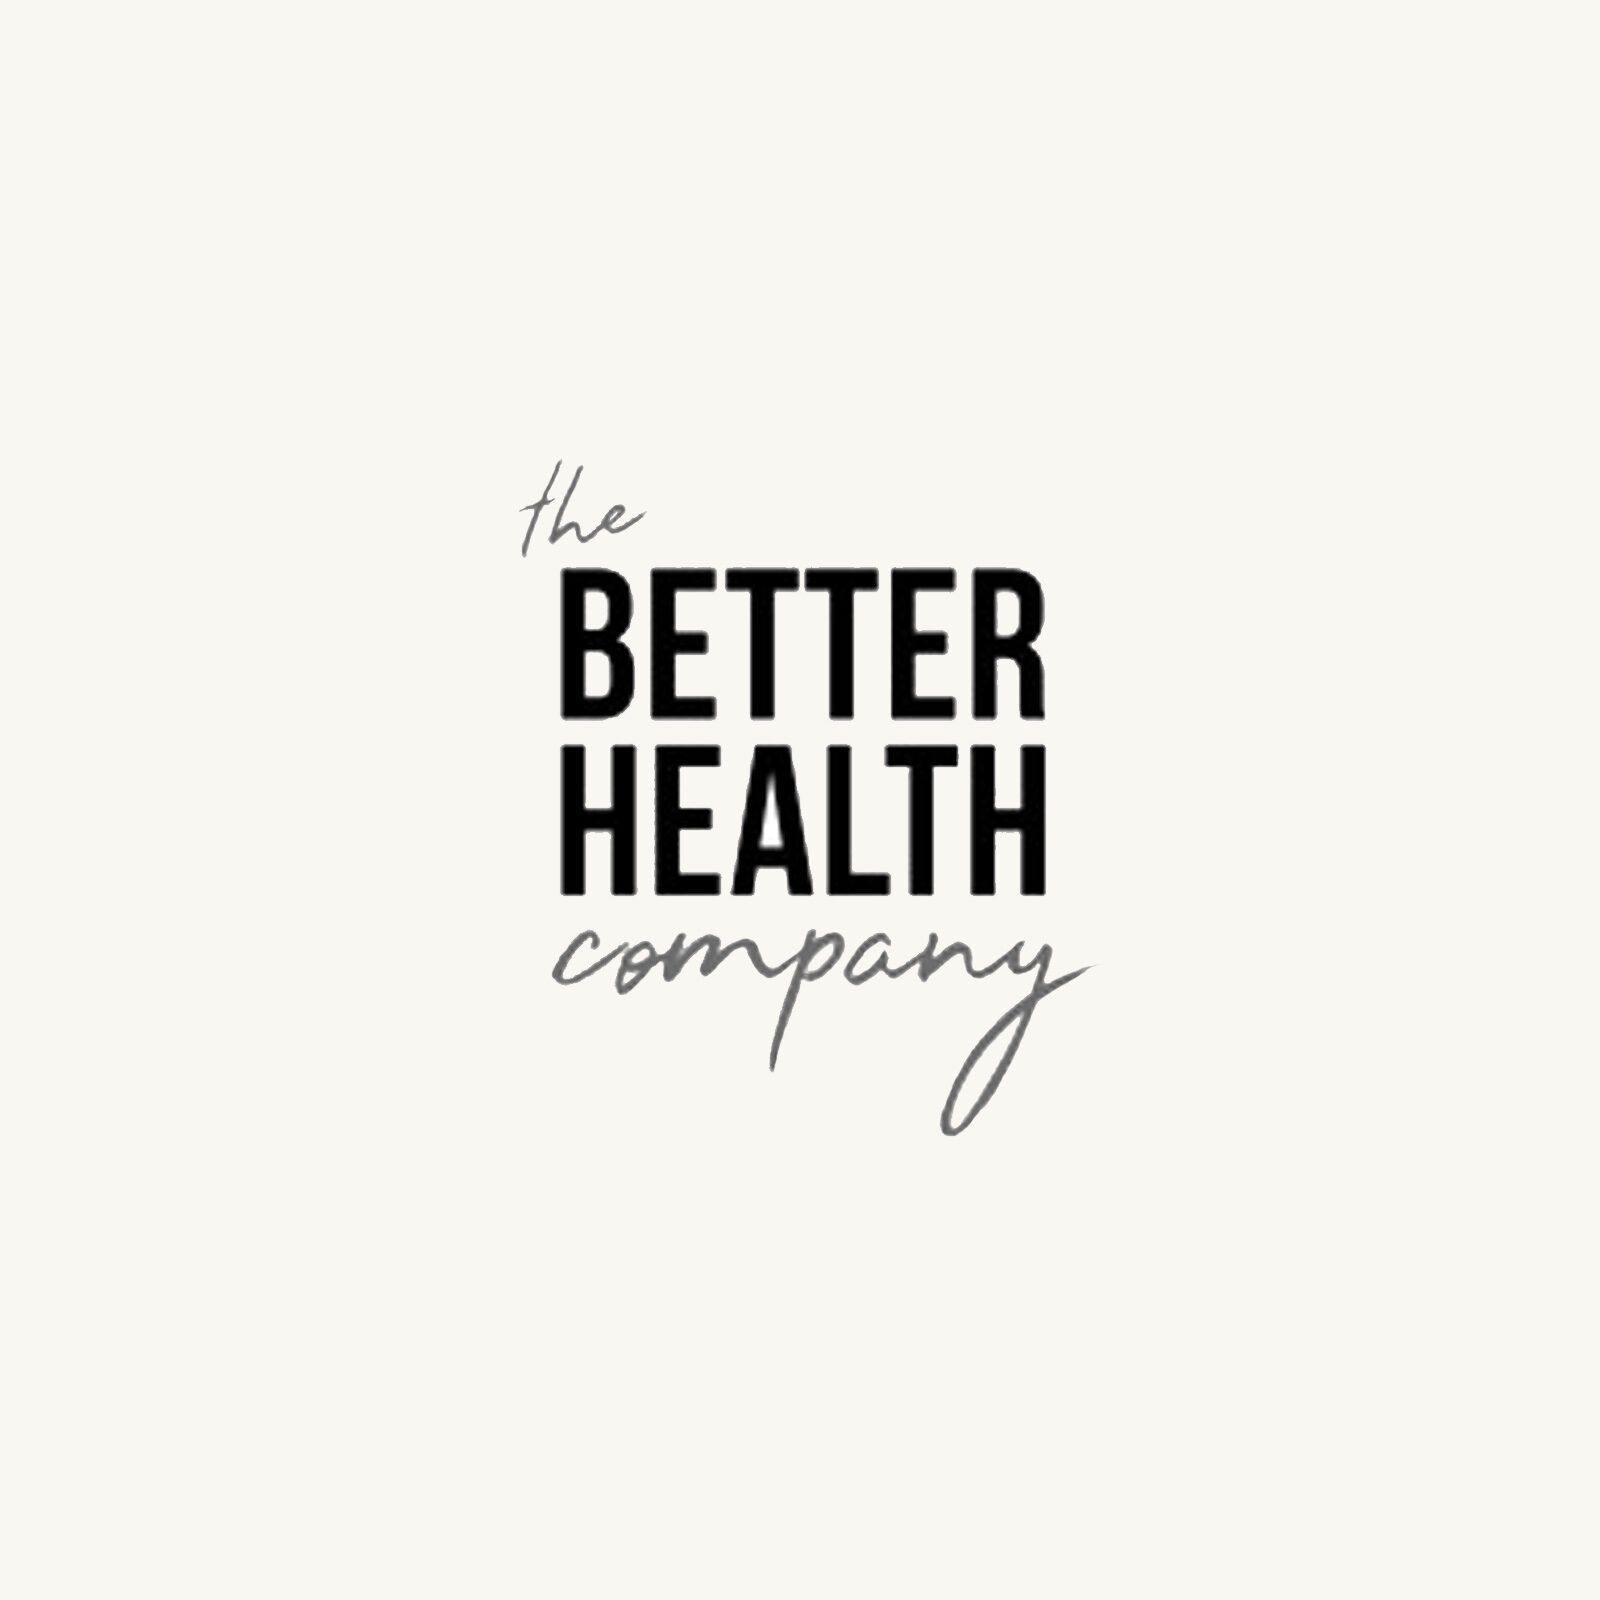 Mark Roxburgh appointed Group Supply Chain Director at The Better Health Company.